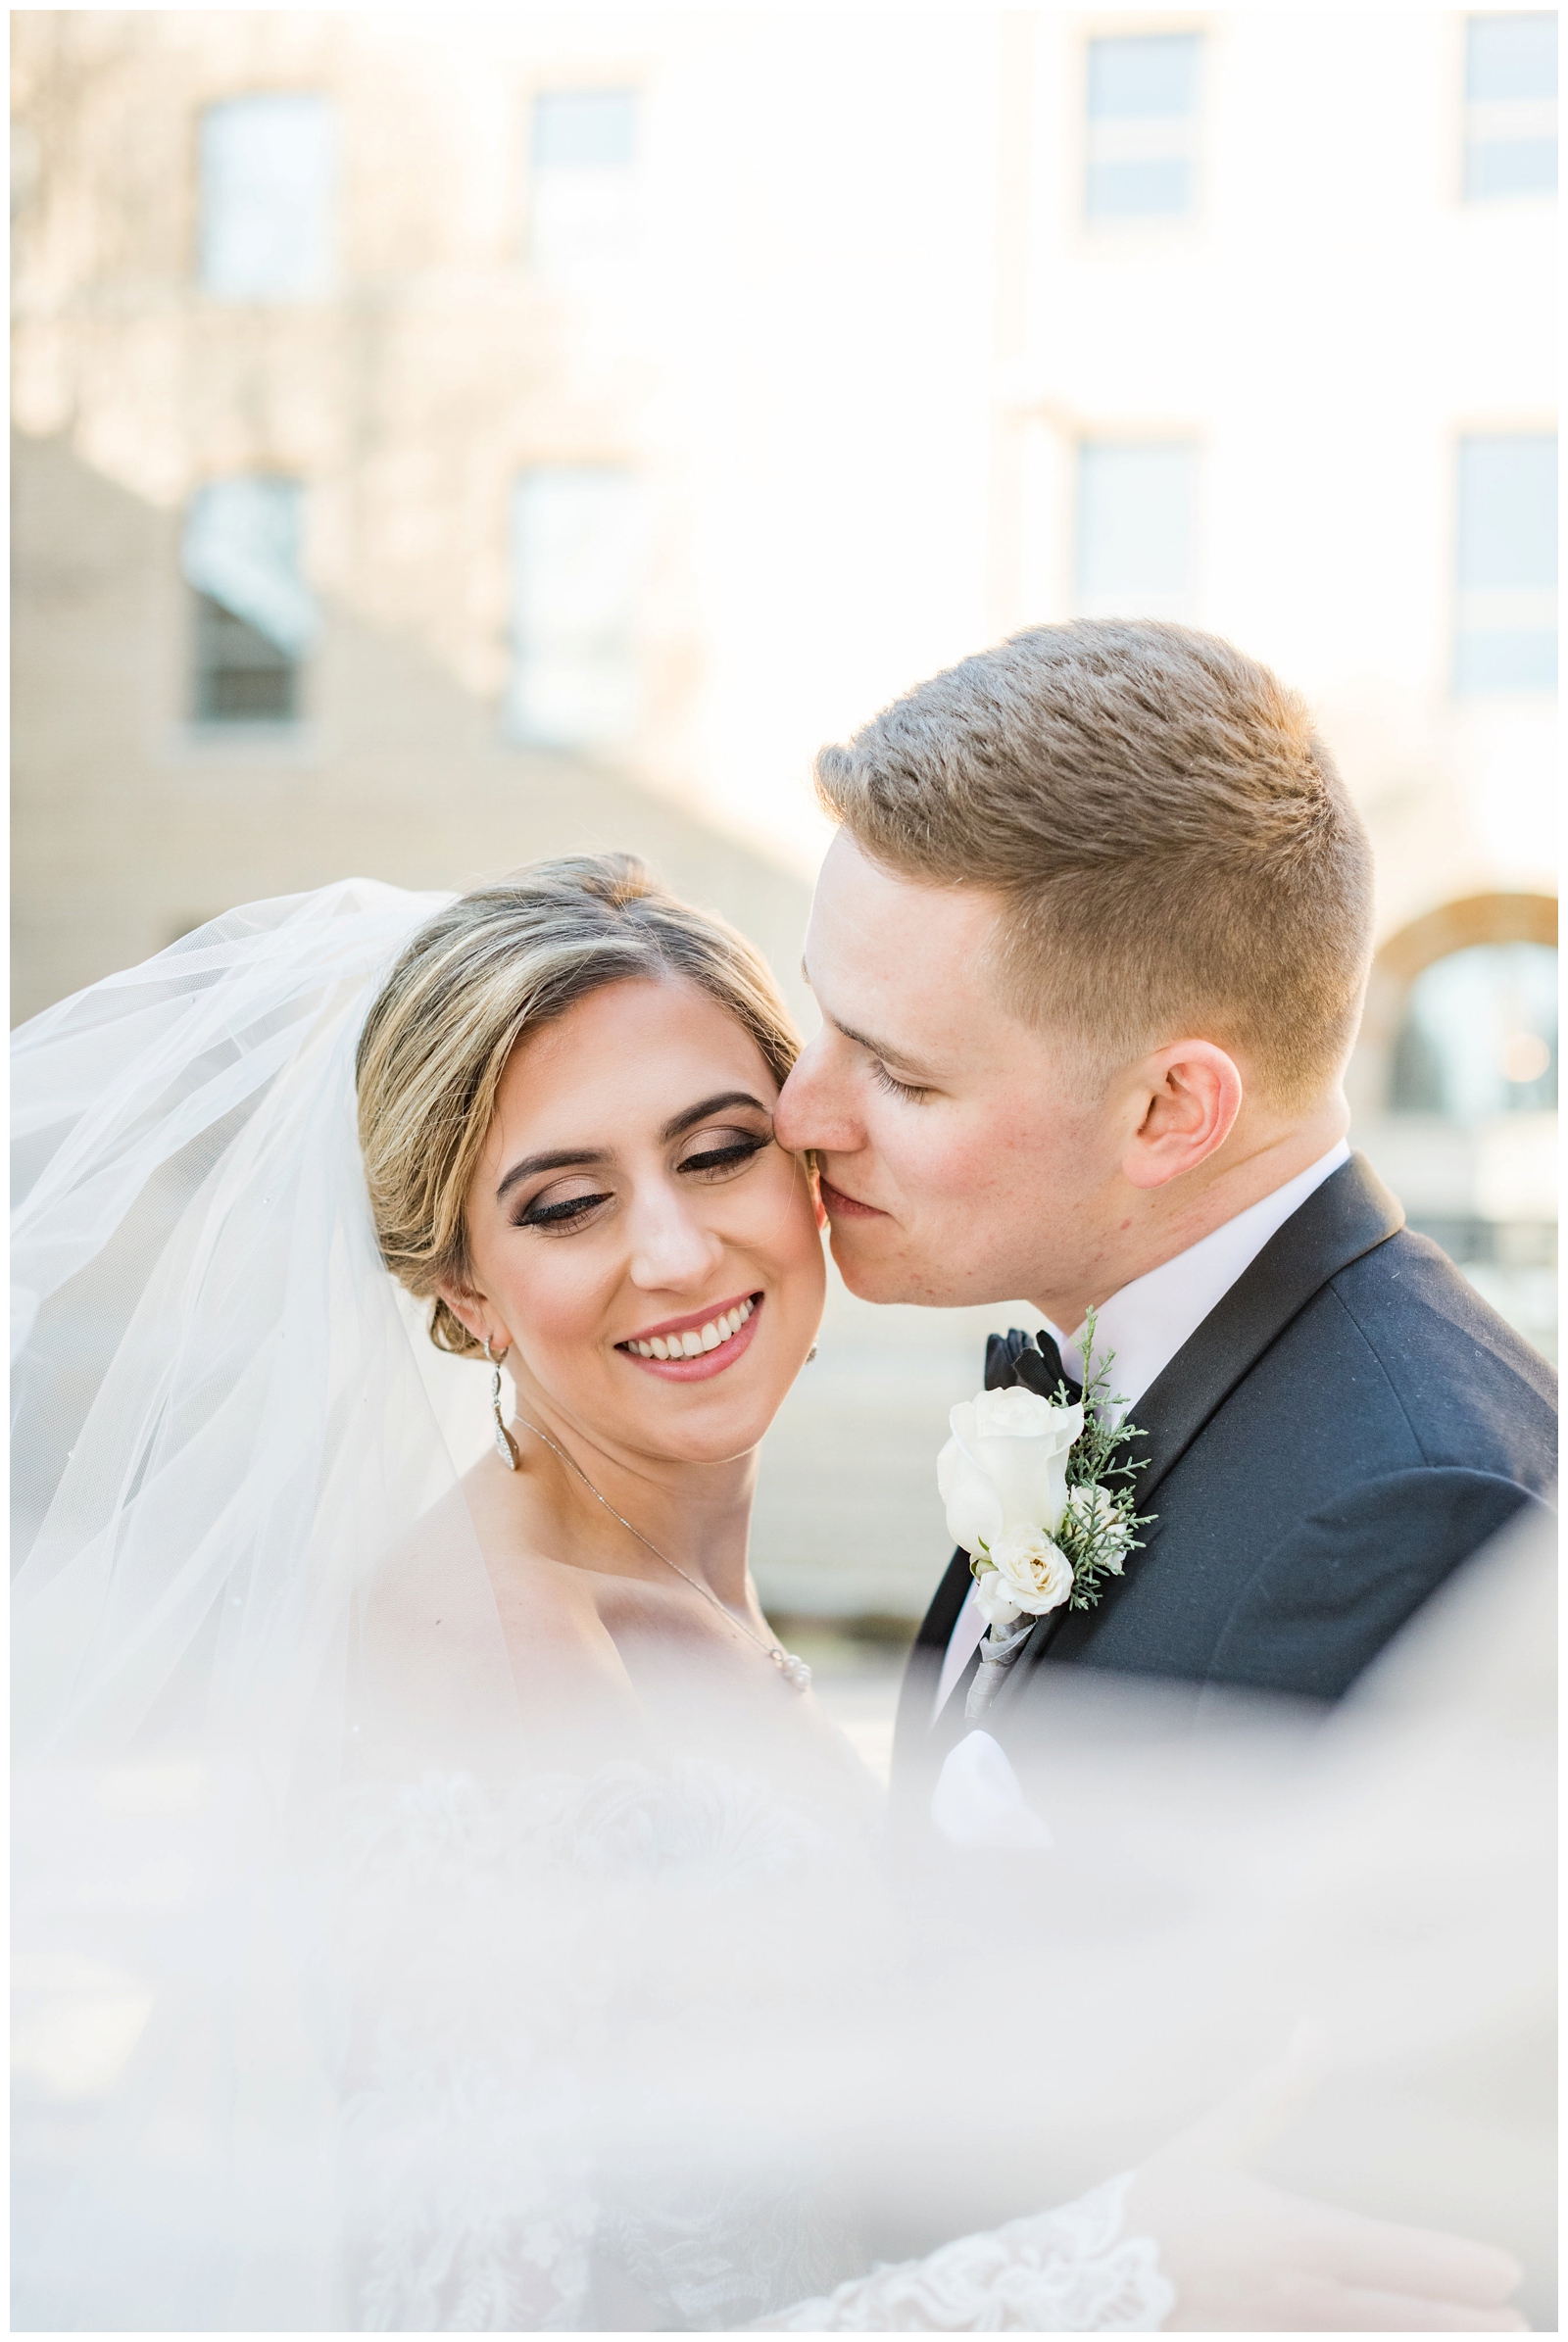 Christmas wedding portraits at St. Charles Preparatory School of bride with veil and groom in classic tux